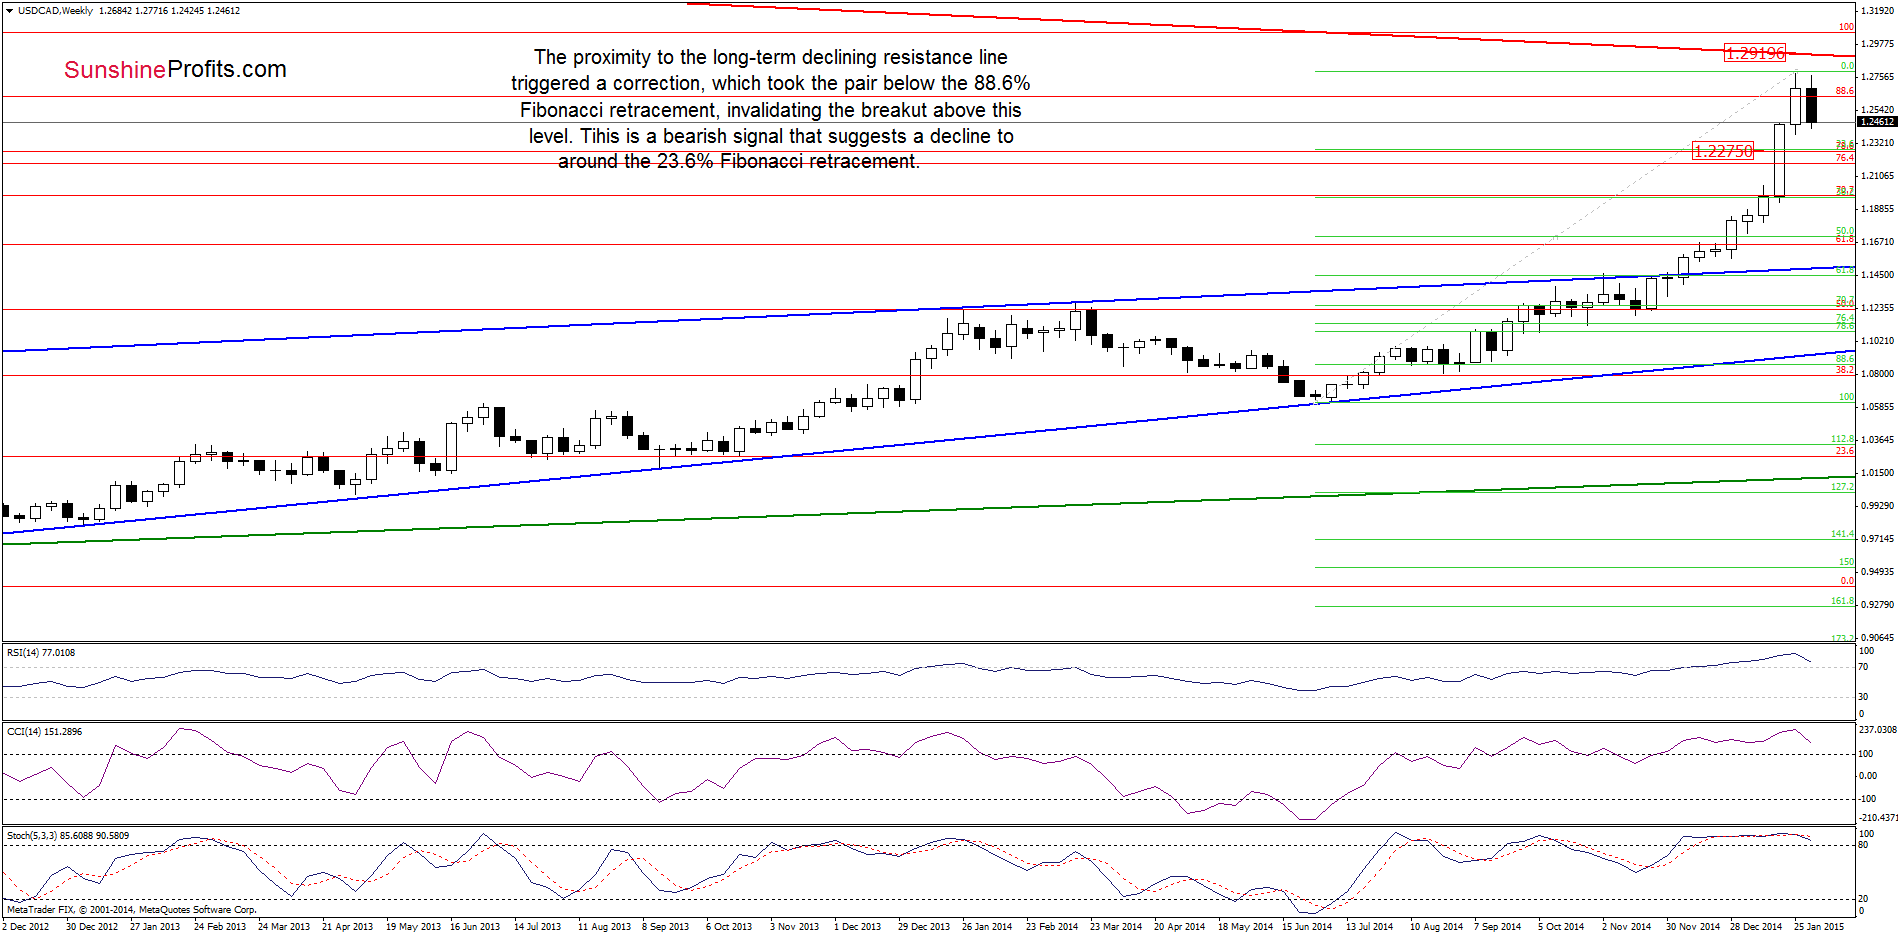 USD/CAD - the weekly chart